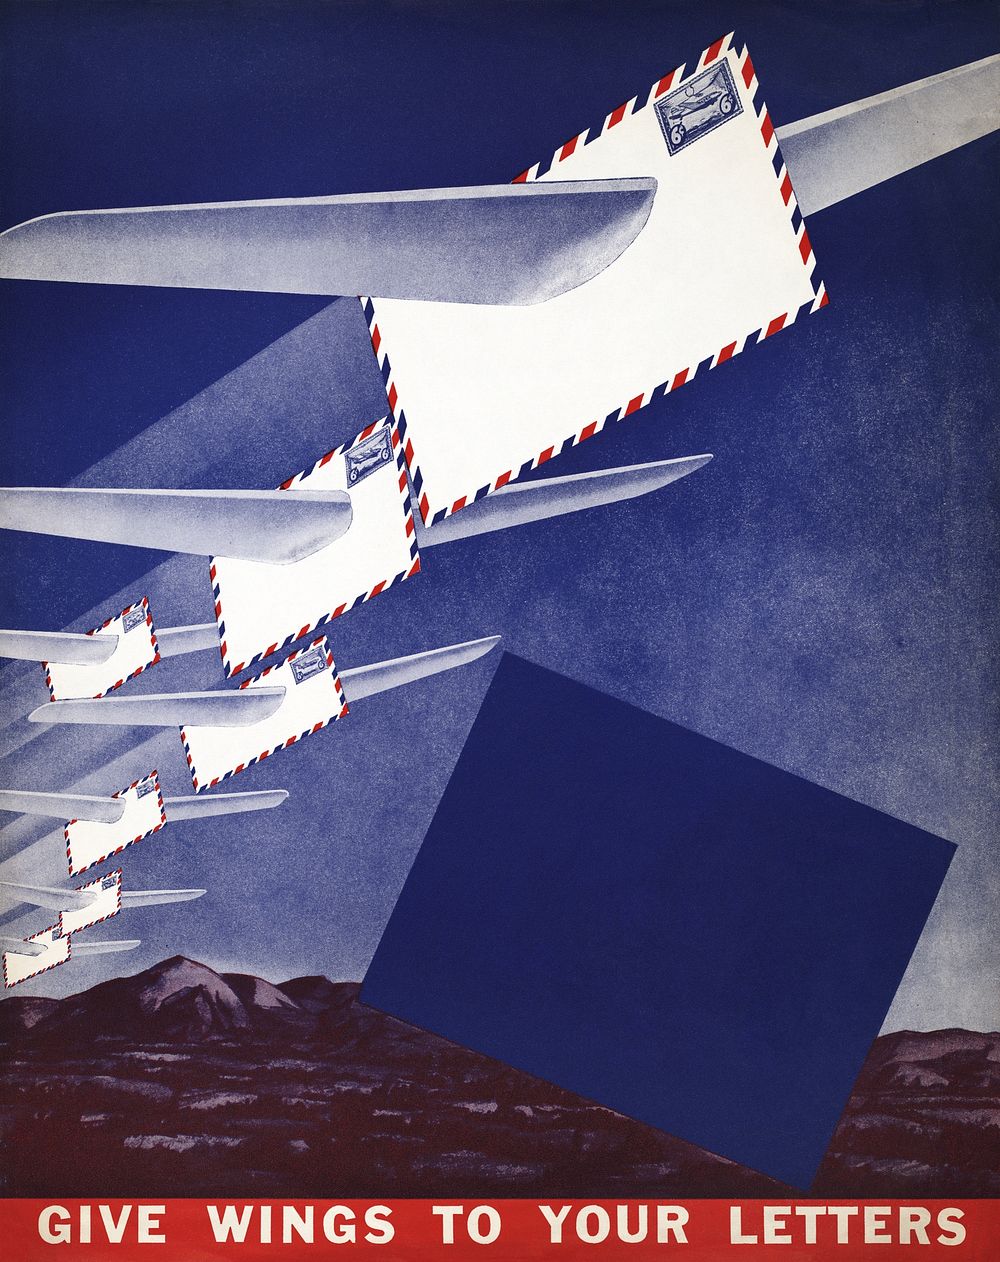 Airmail poster, chromolithograph art. Original public domain image from Smithsonian. Digitally enhanced by rawpixel.